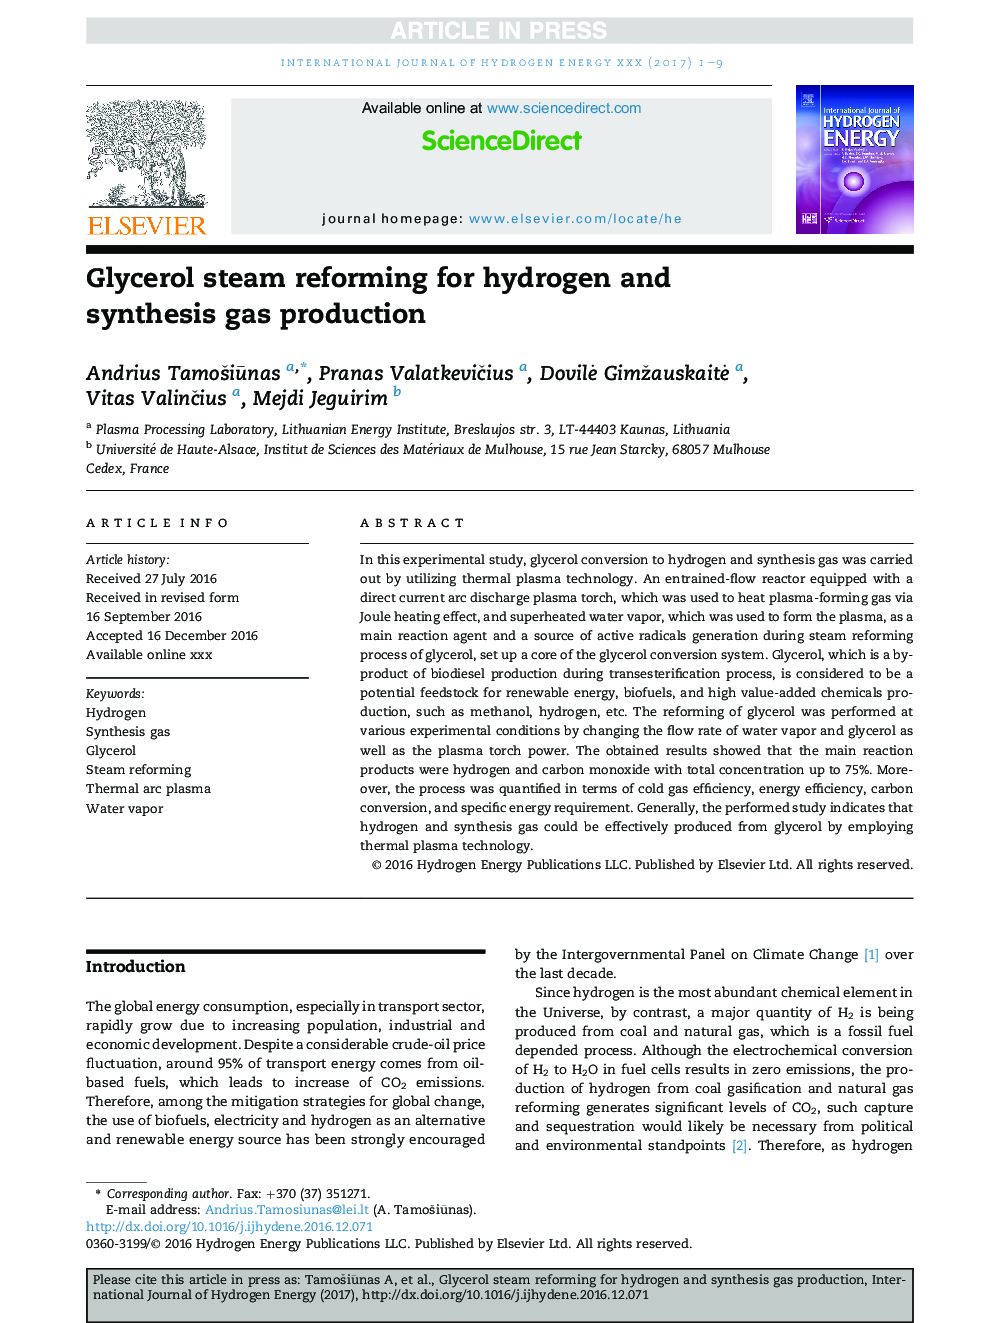 Glycerol steam reforming for hydrogen and synthesis gas production